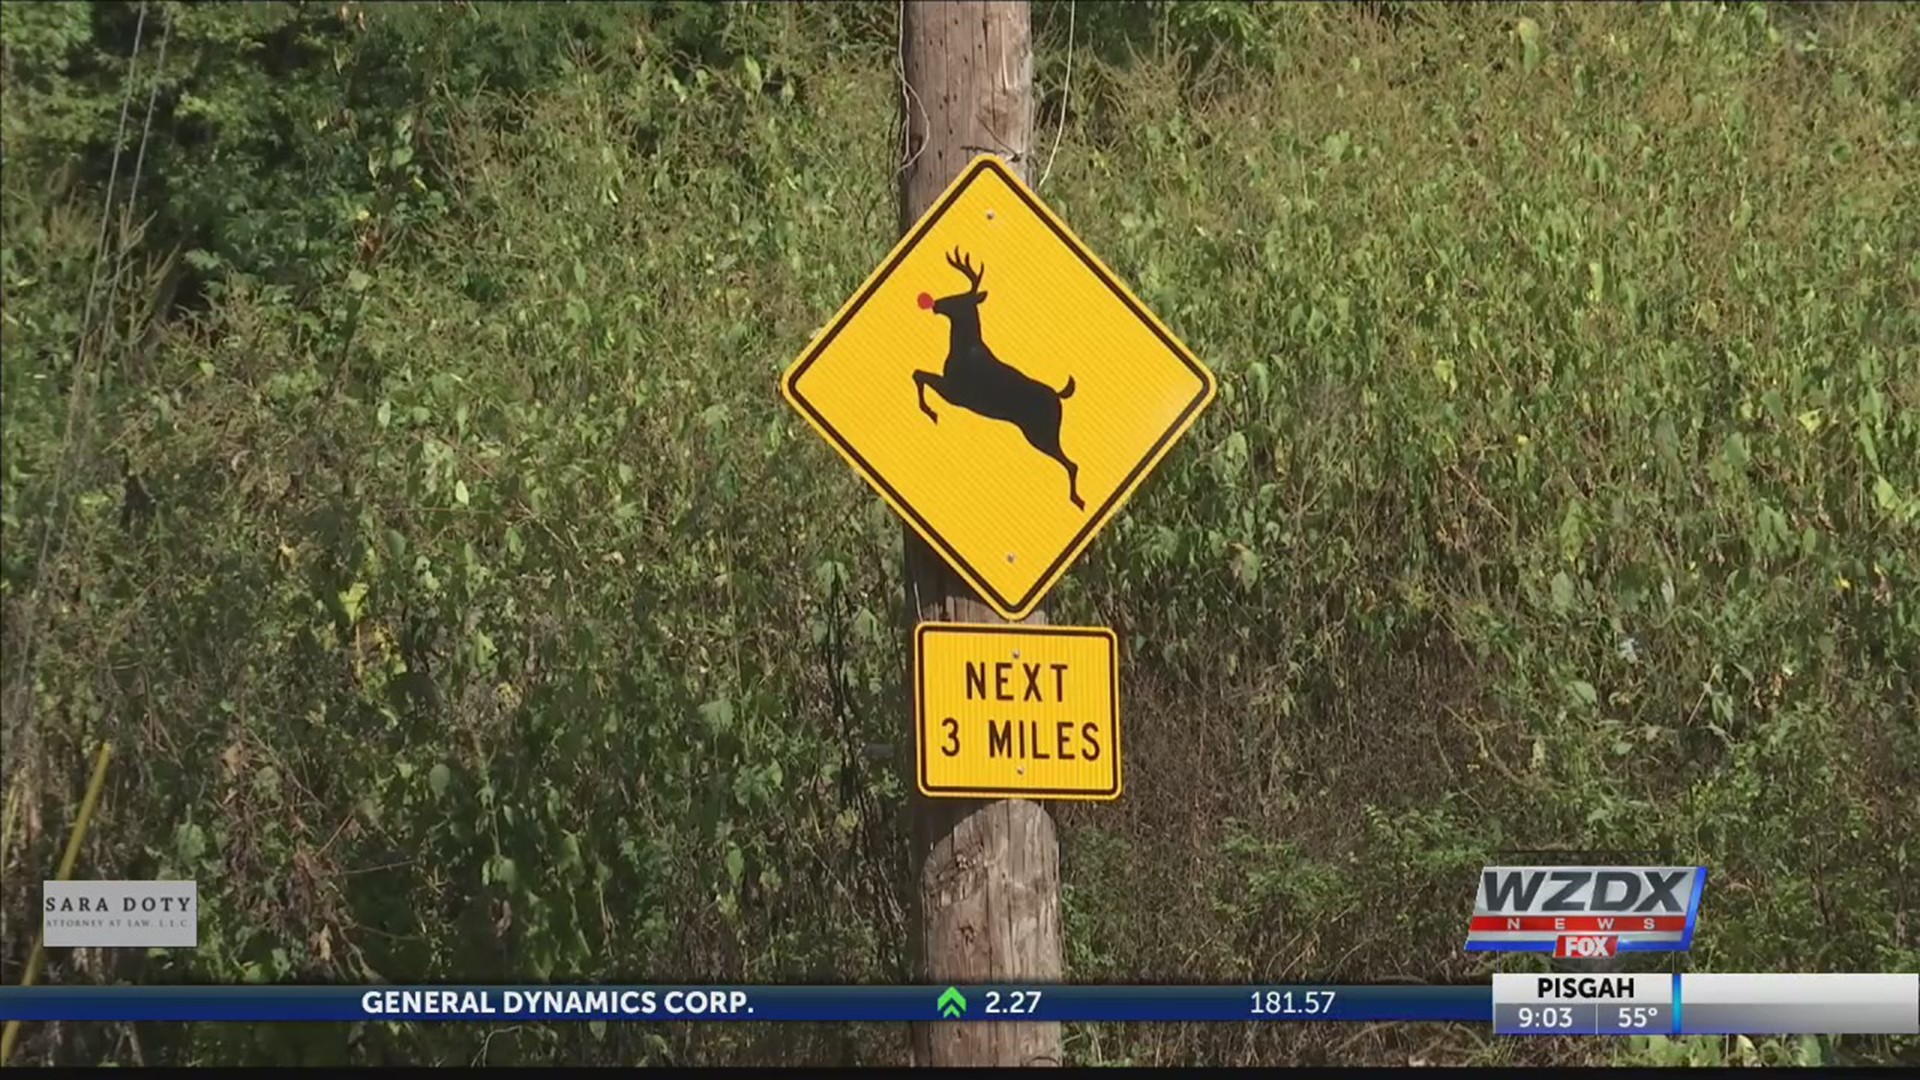 There's something you'll want to be aware of next time you get behind the wheel. It is mating season for deer, and deer-related automobile accidents are highest this time of year.